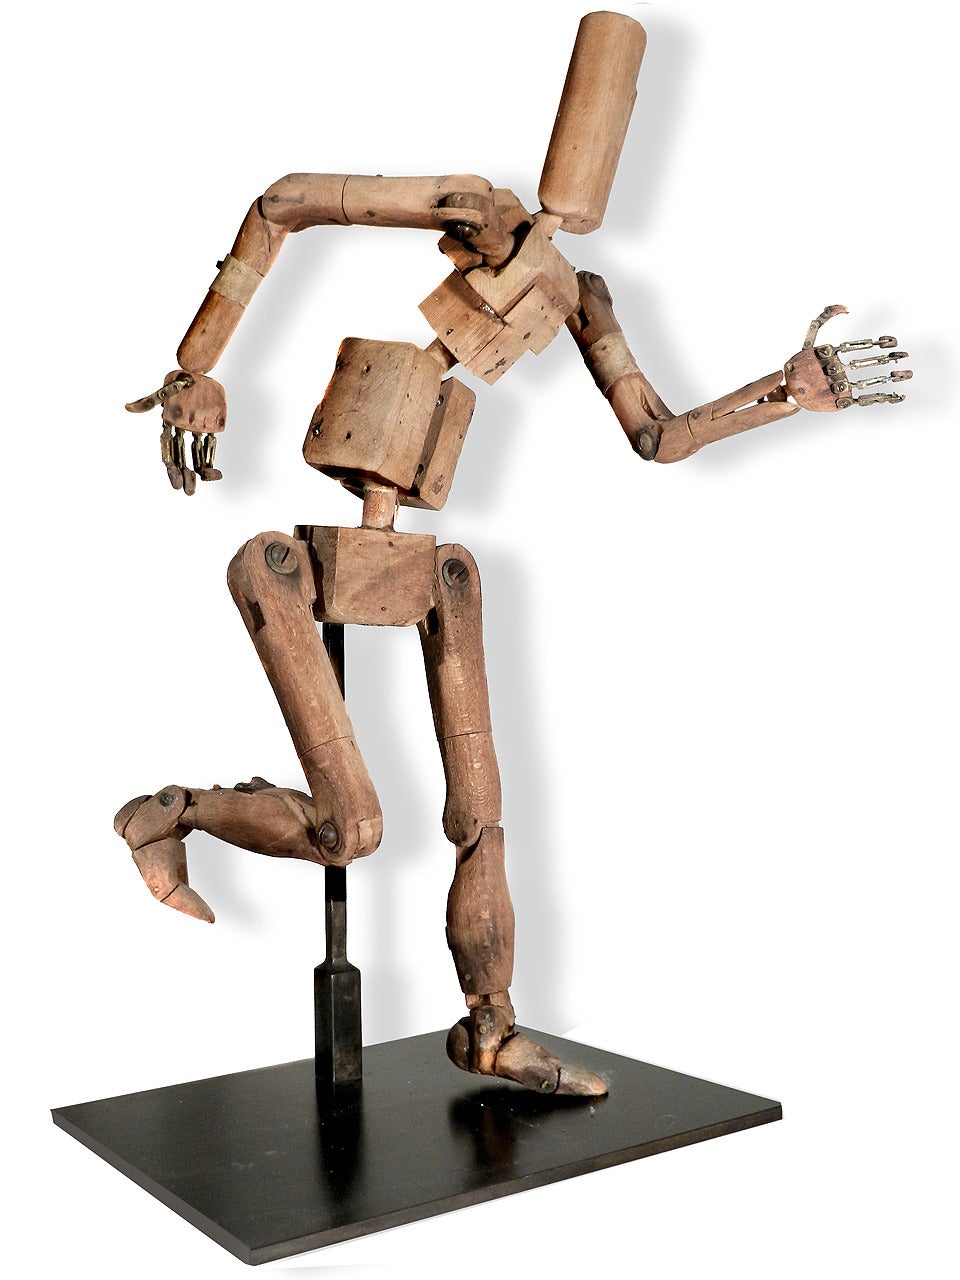 Of all the things I offer these posable schematic artist's mannequins are my favorite. They give any space they are in personality and also have a machine like quality. This one is complete with brass and wood ball joints, articulated hands and